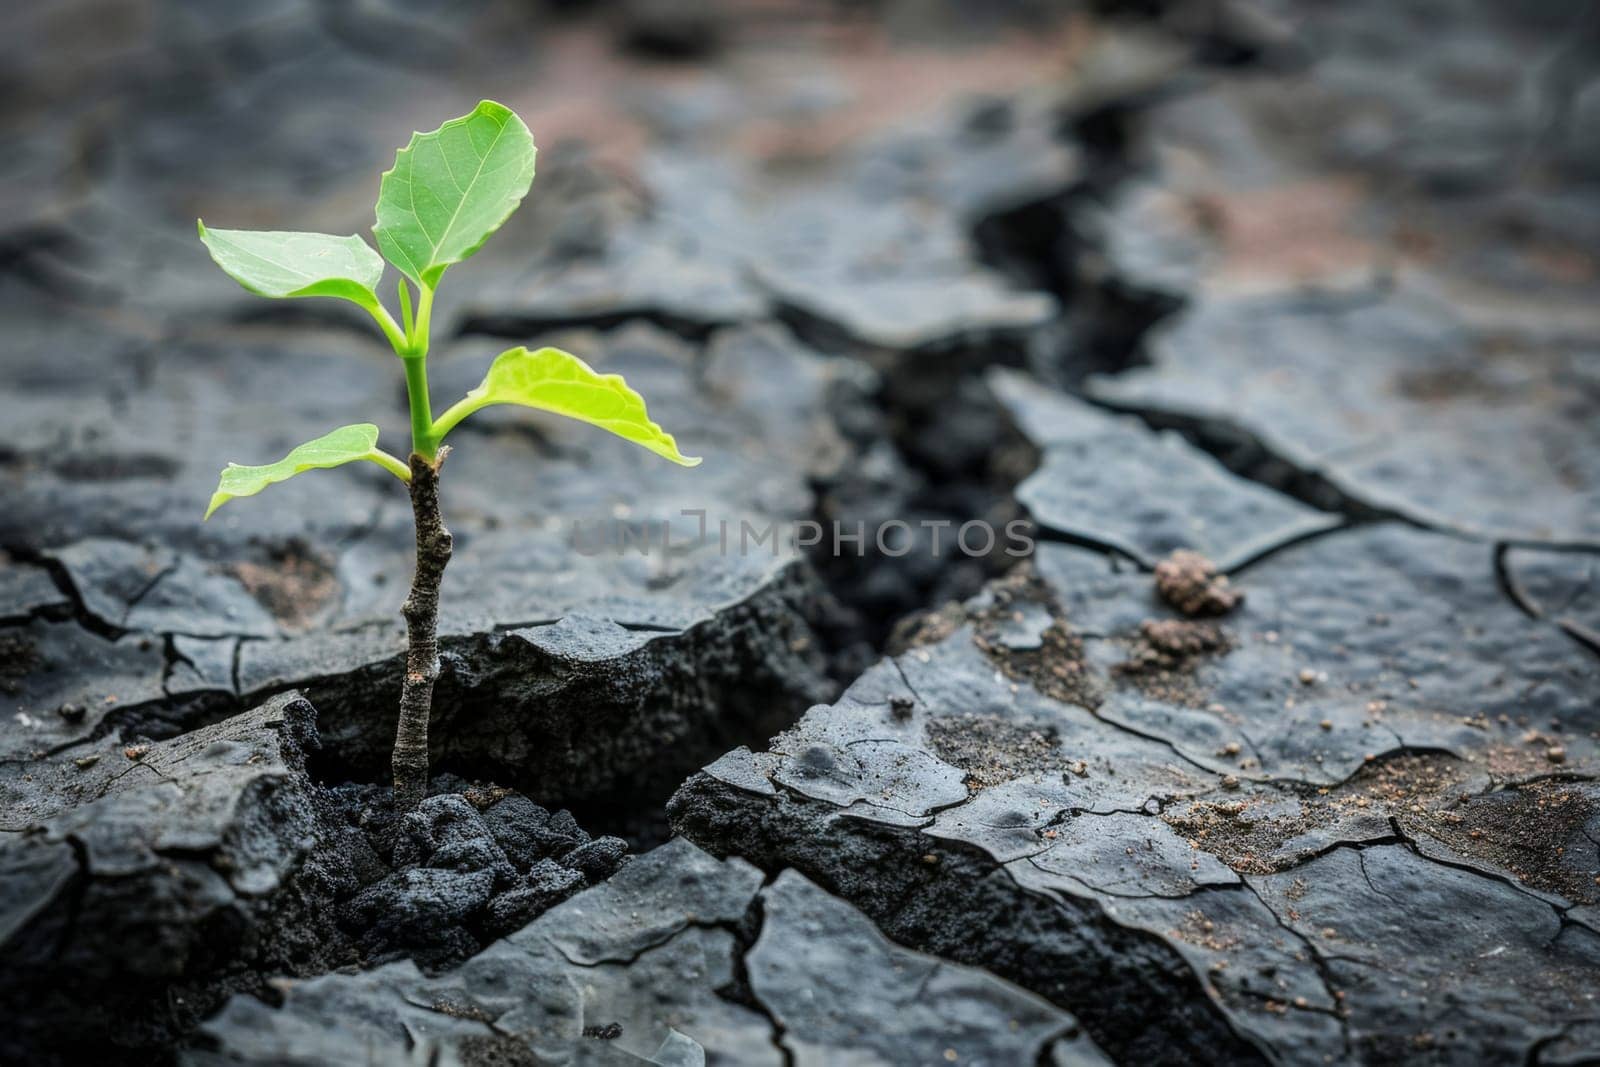 A lone sapling emerges from a web of cracked soil, a testament to life's resilience against the backdrop of environmental hardship